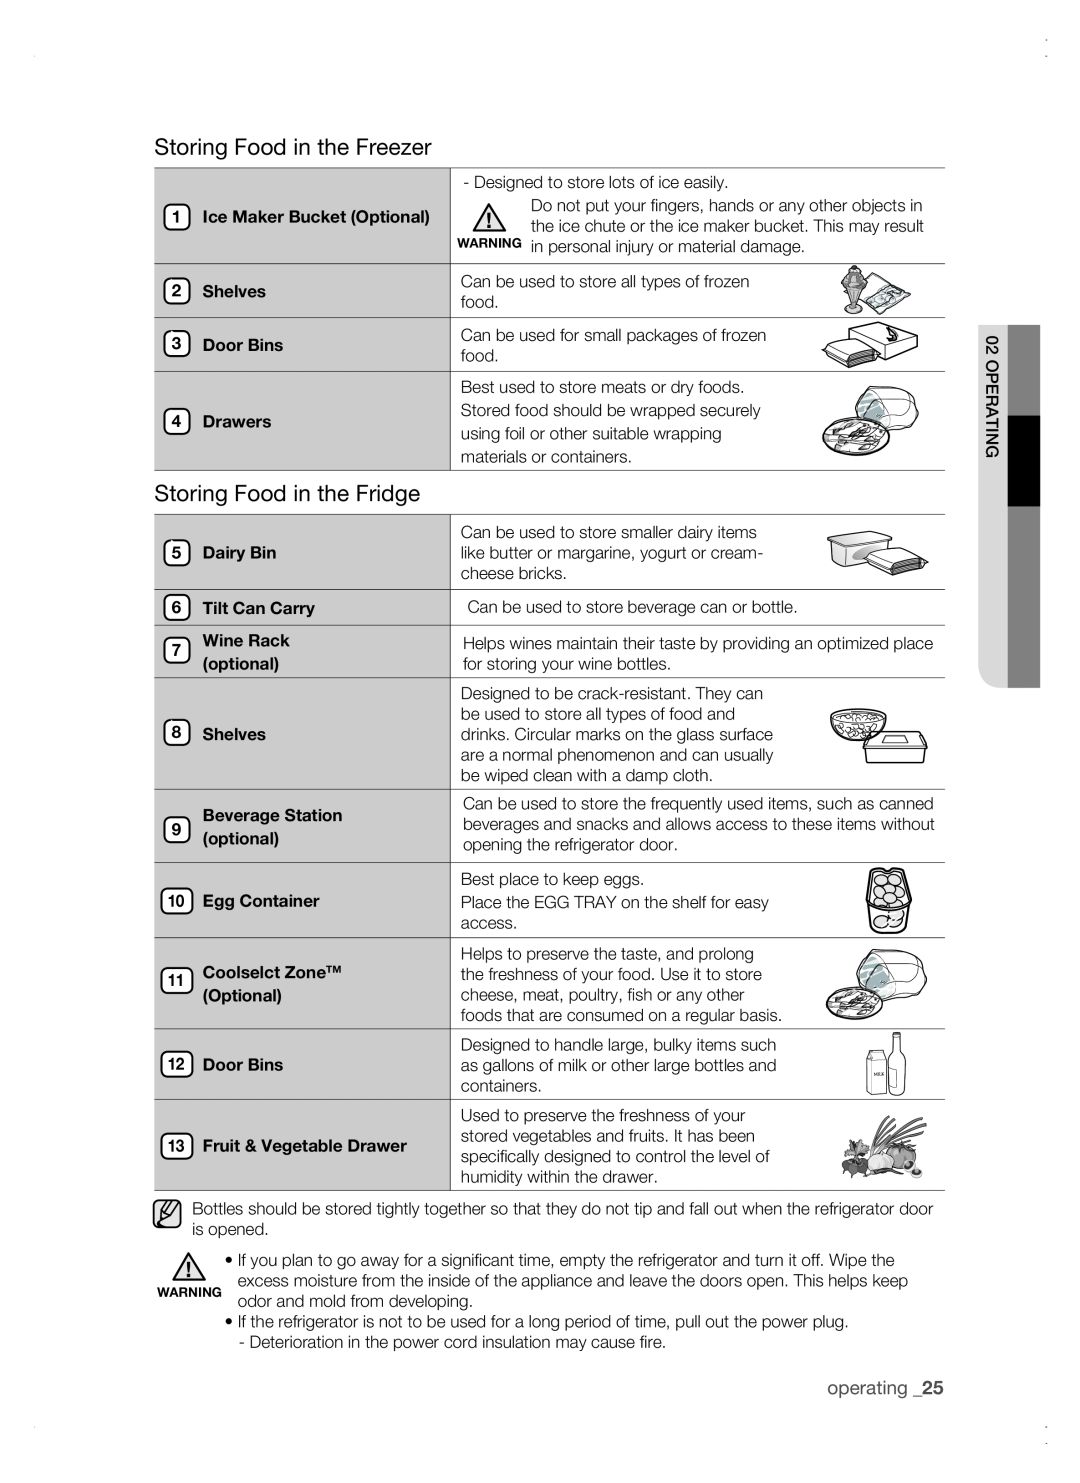 Samsung RSG5 user manual Storing Food in the Freezer, Storing Food in the Fridge, operating 